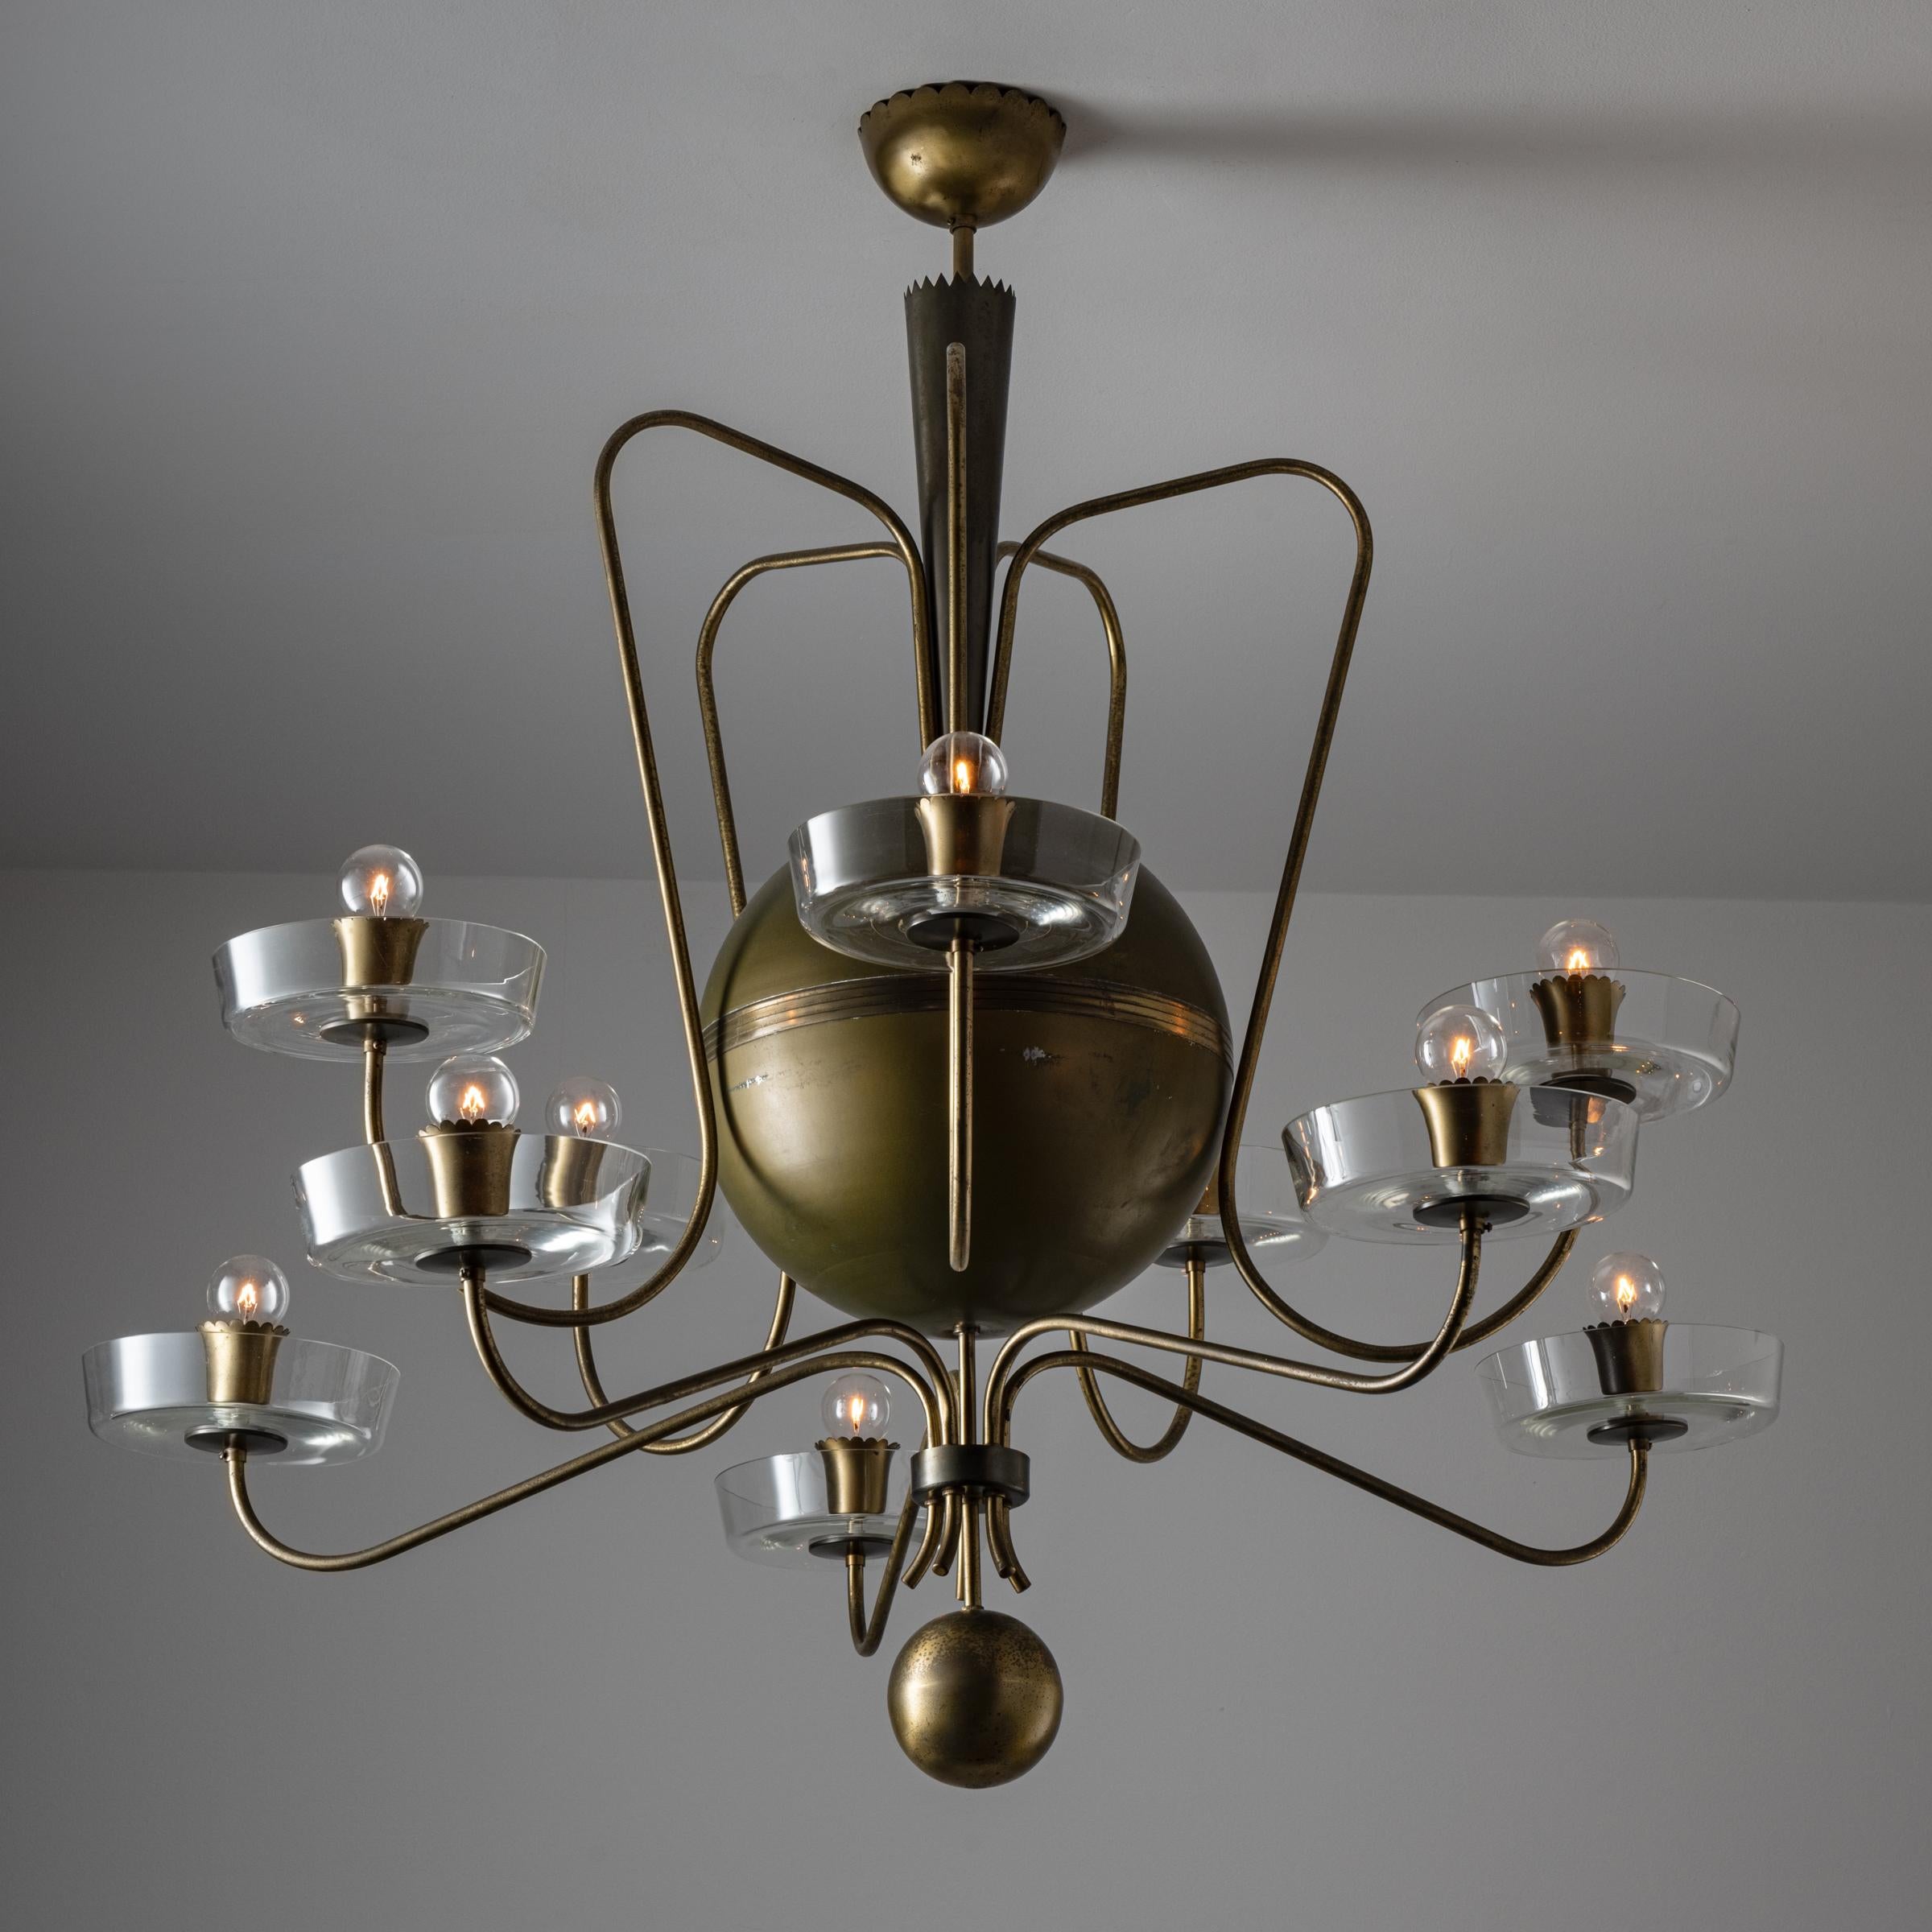 Custom Italian chandelier. Designed and manufactured in Italy, circa 1940's Brass, glass, original brass canopy, custom brass backplate. Rewired for U.S standards. Lamping: Allow 10 qty 120v E14 Candelabra Socket with 25w Clear Globes. Light bulbs